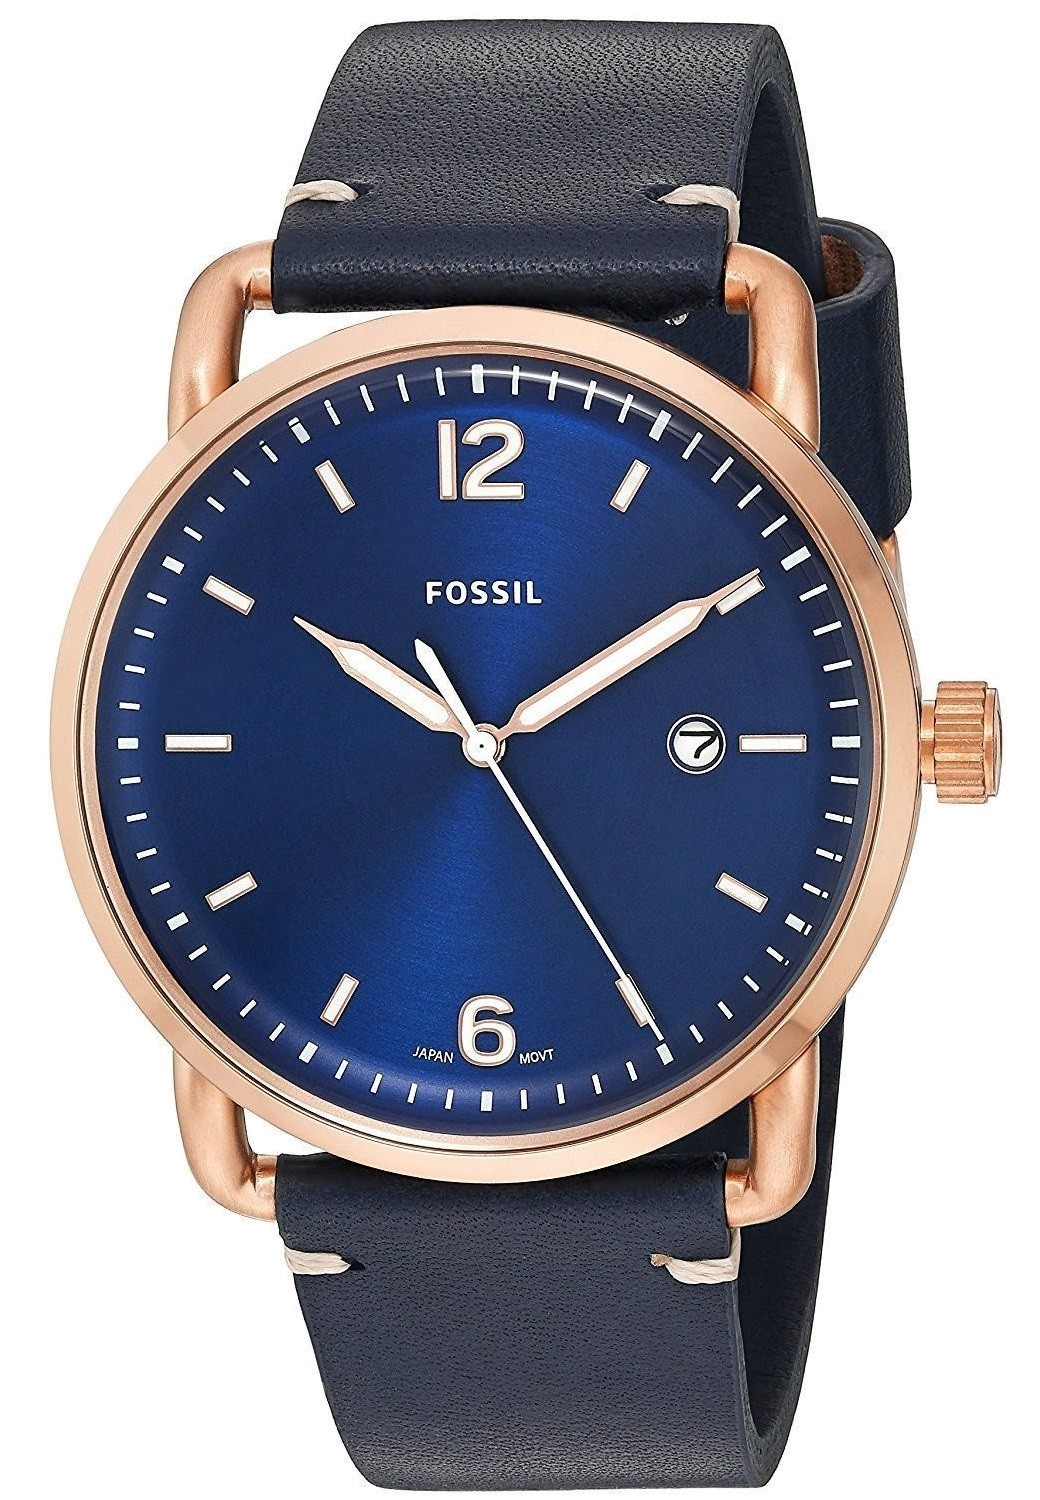 Fossil Men's The Commuter Three-Hand Date Blue Leather Watch - FS5274